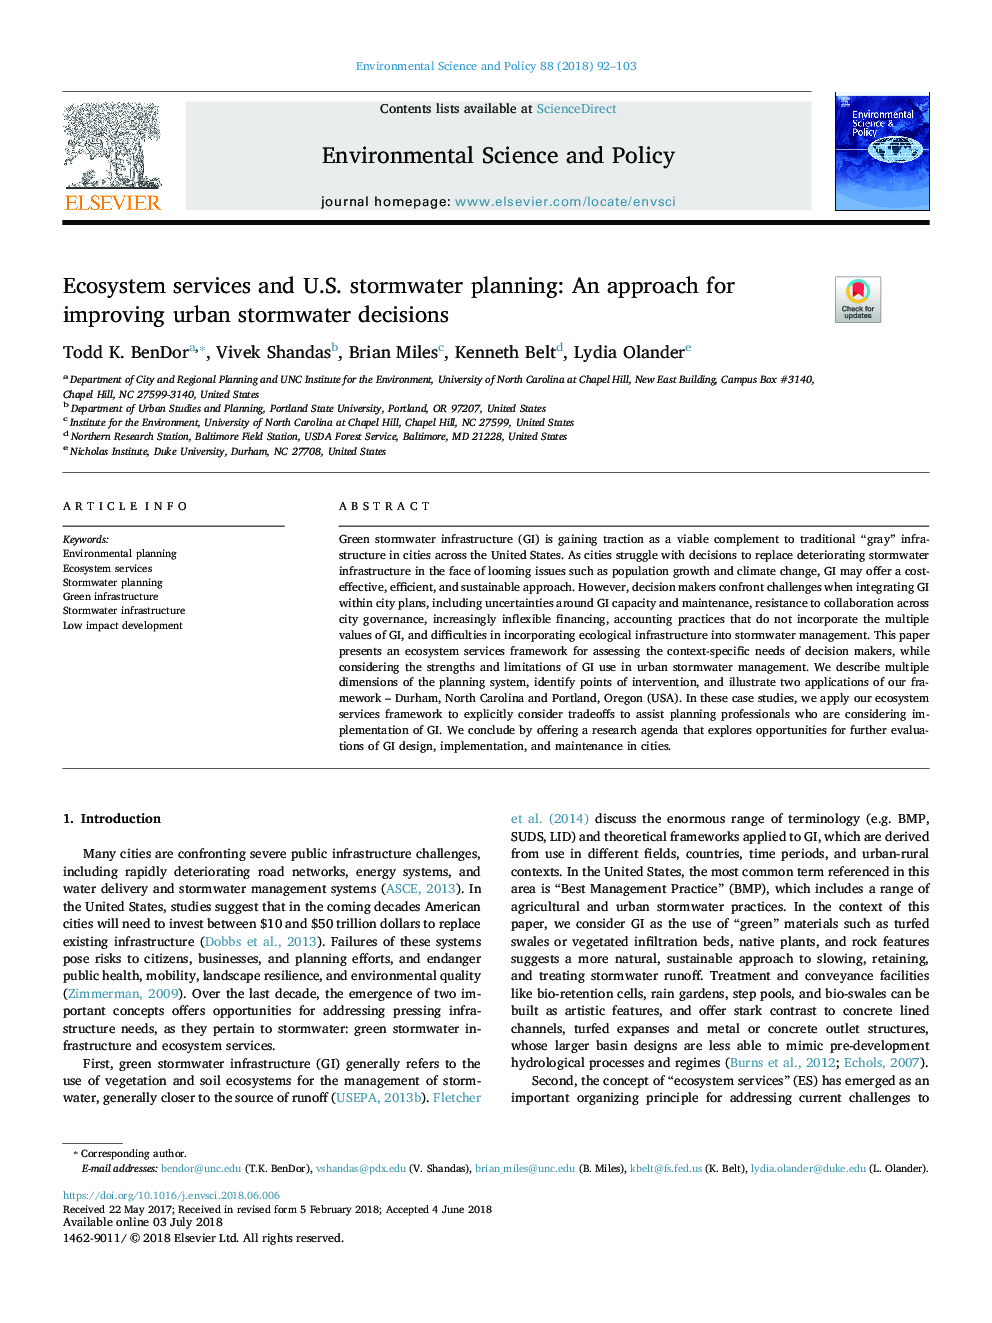 Ecosystem services and U.S. stormwater planning: An approach for improving urban stormwater decisions